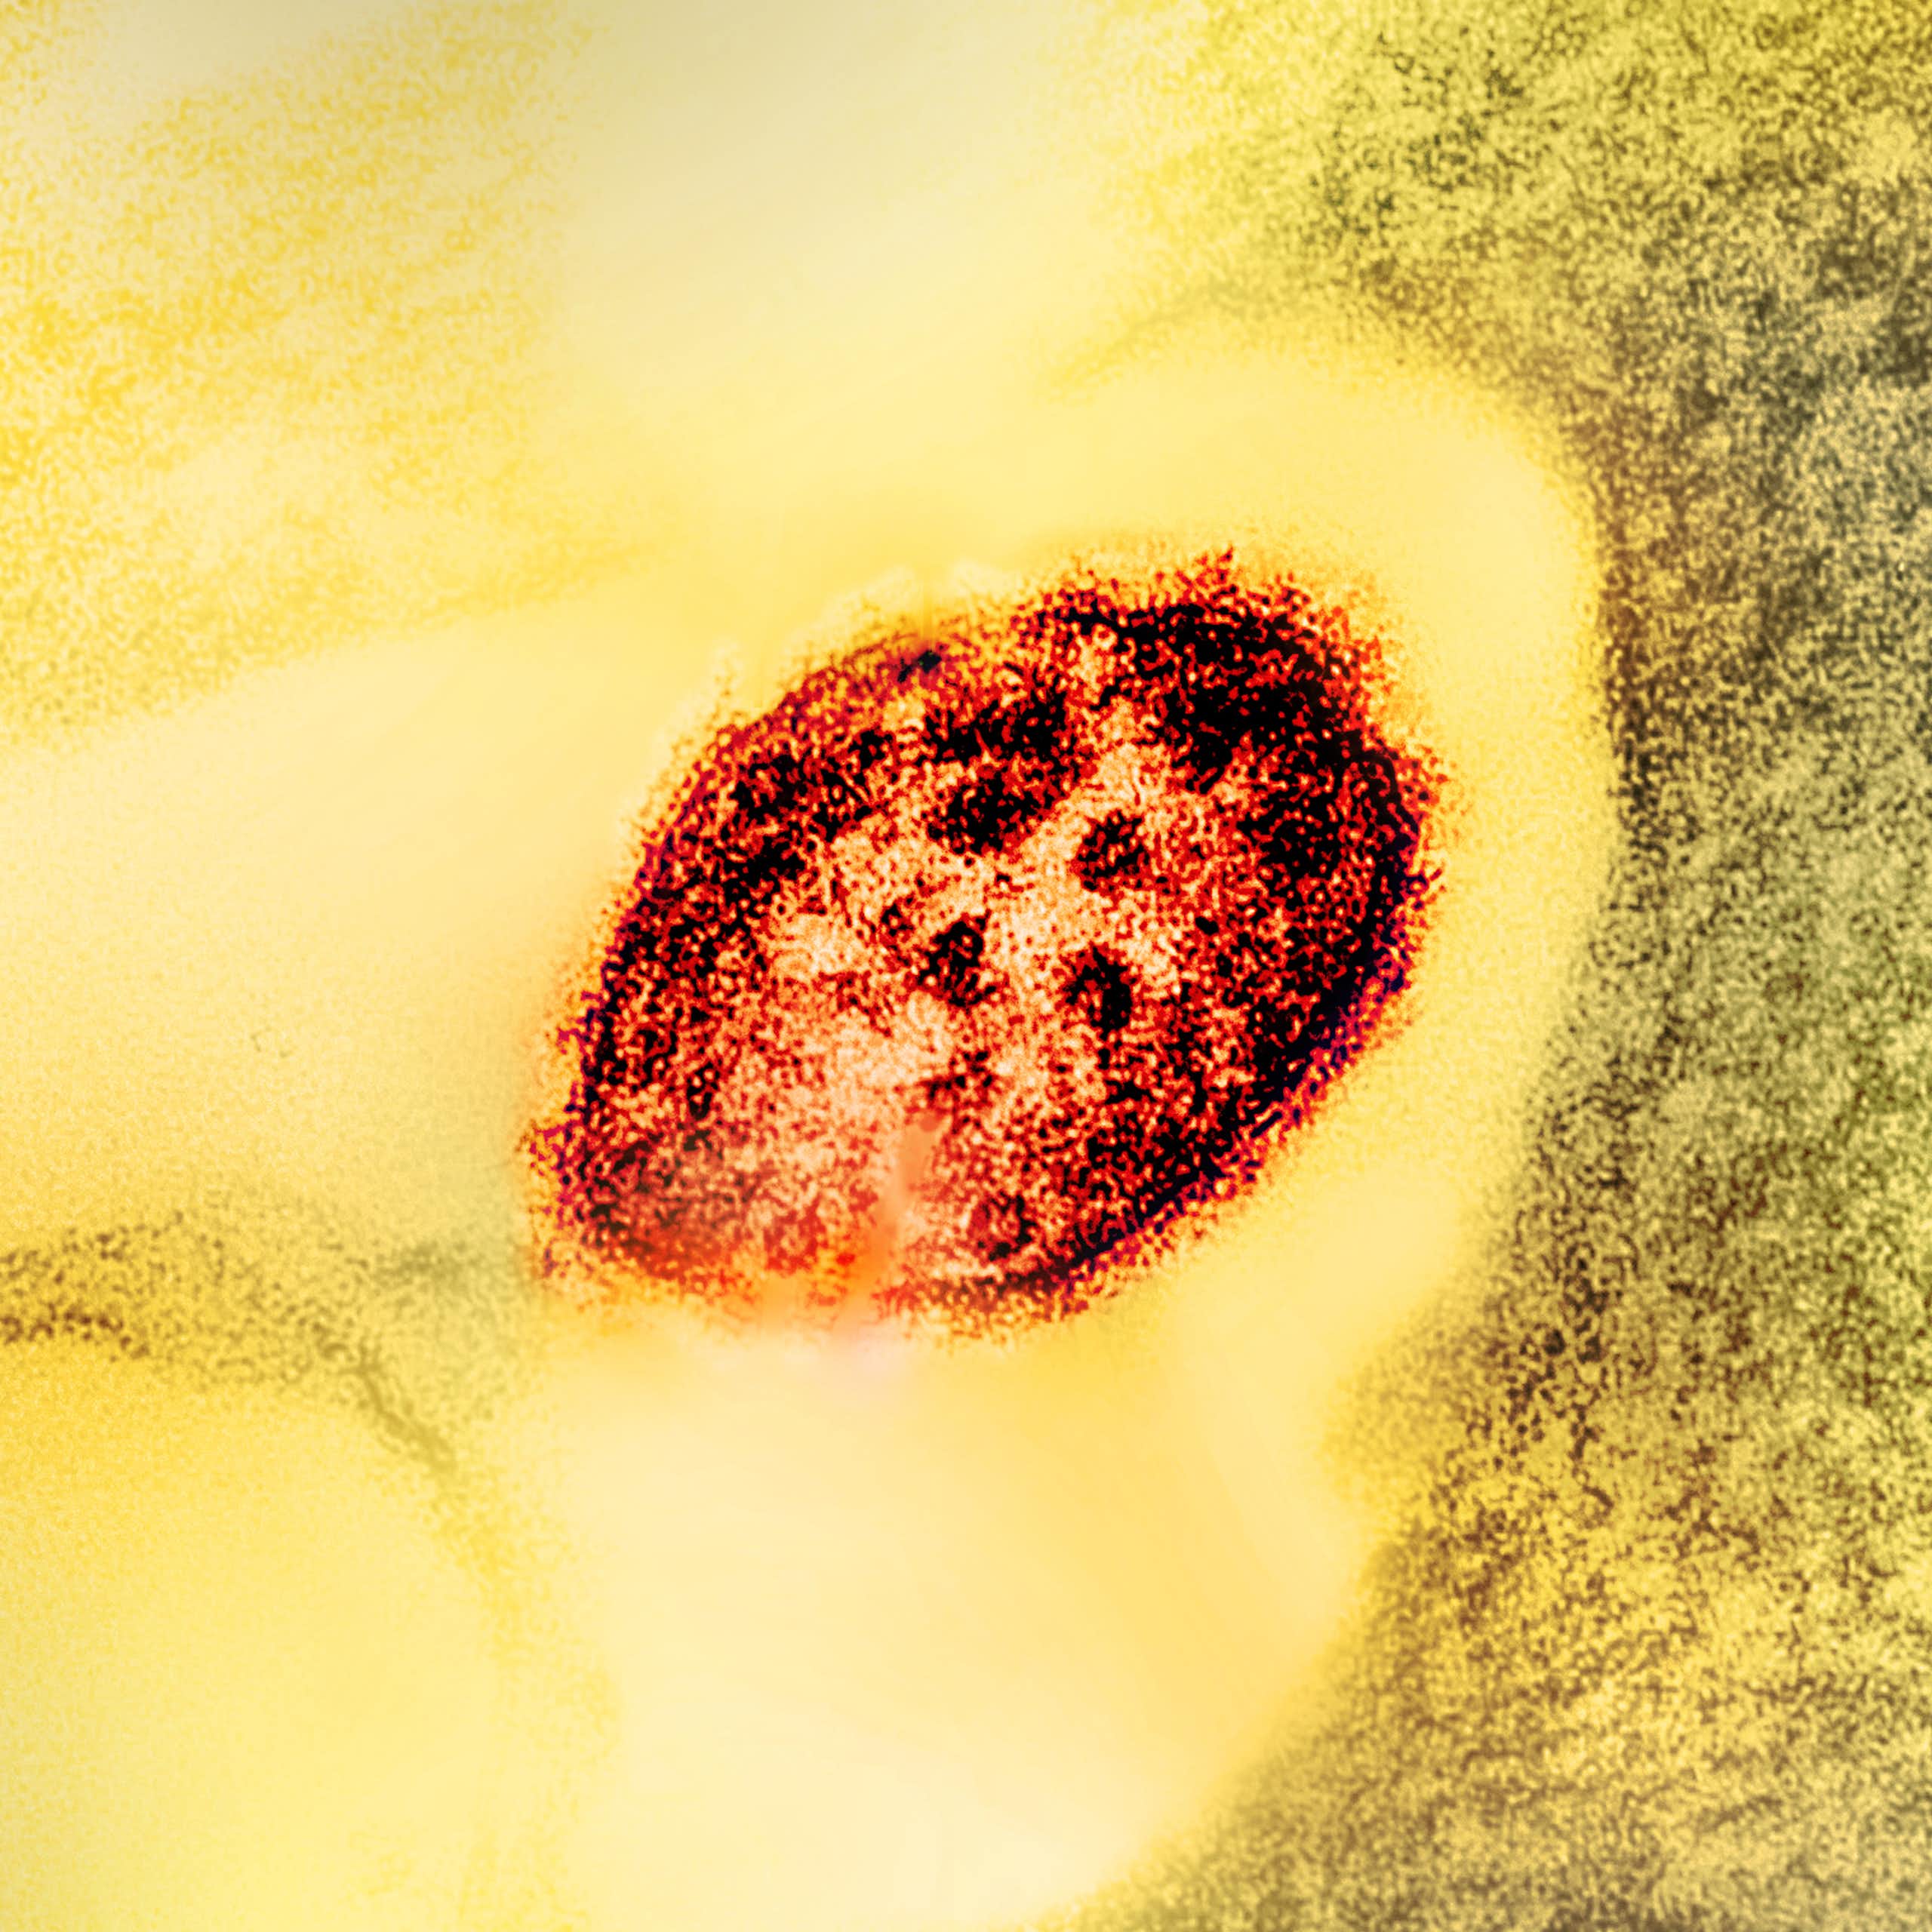 Microscopic view of a red almond-shaped virus particle on a yellow background